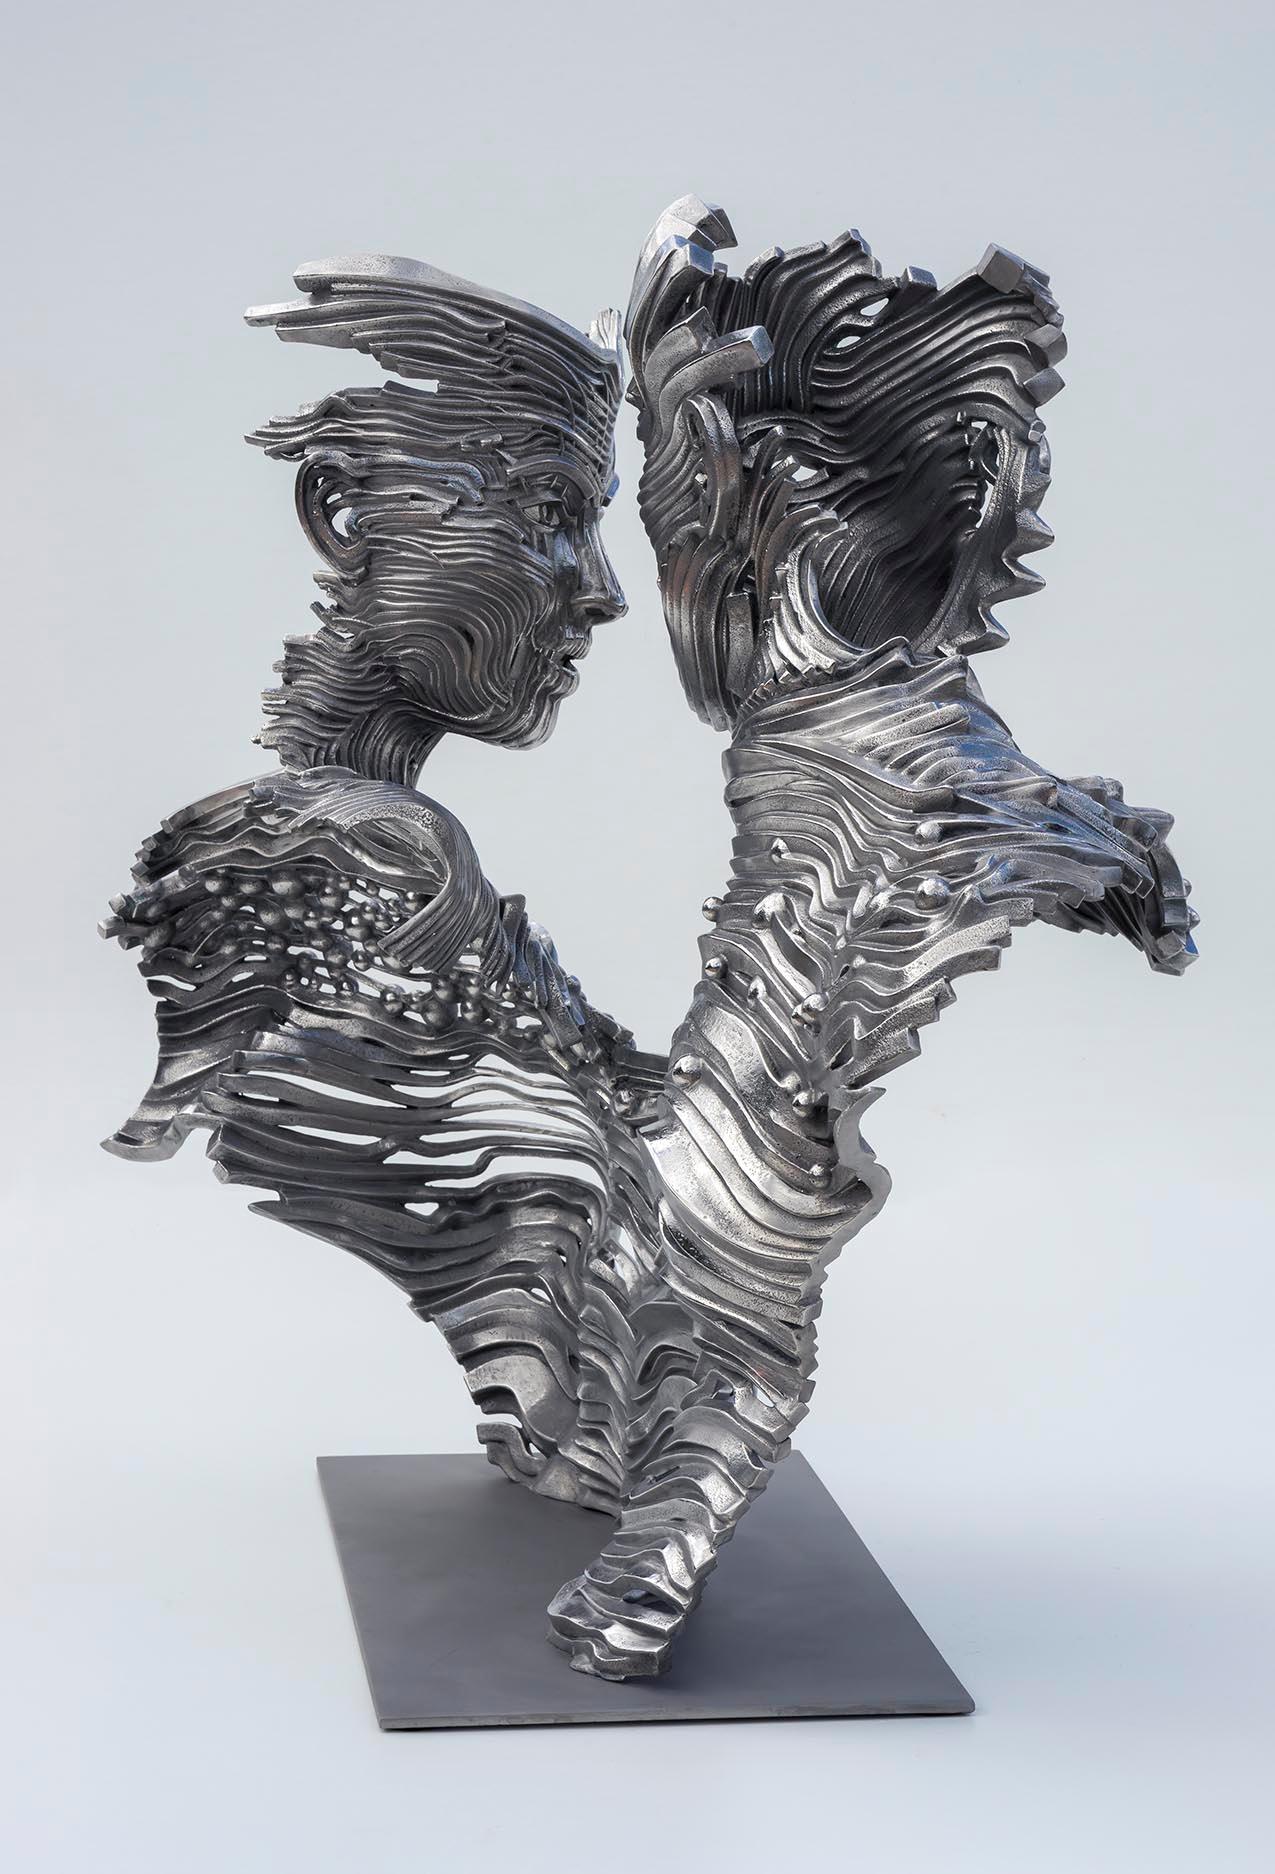 Stainless steel sculpture
Edition of 10